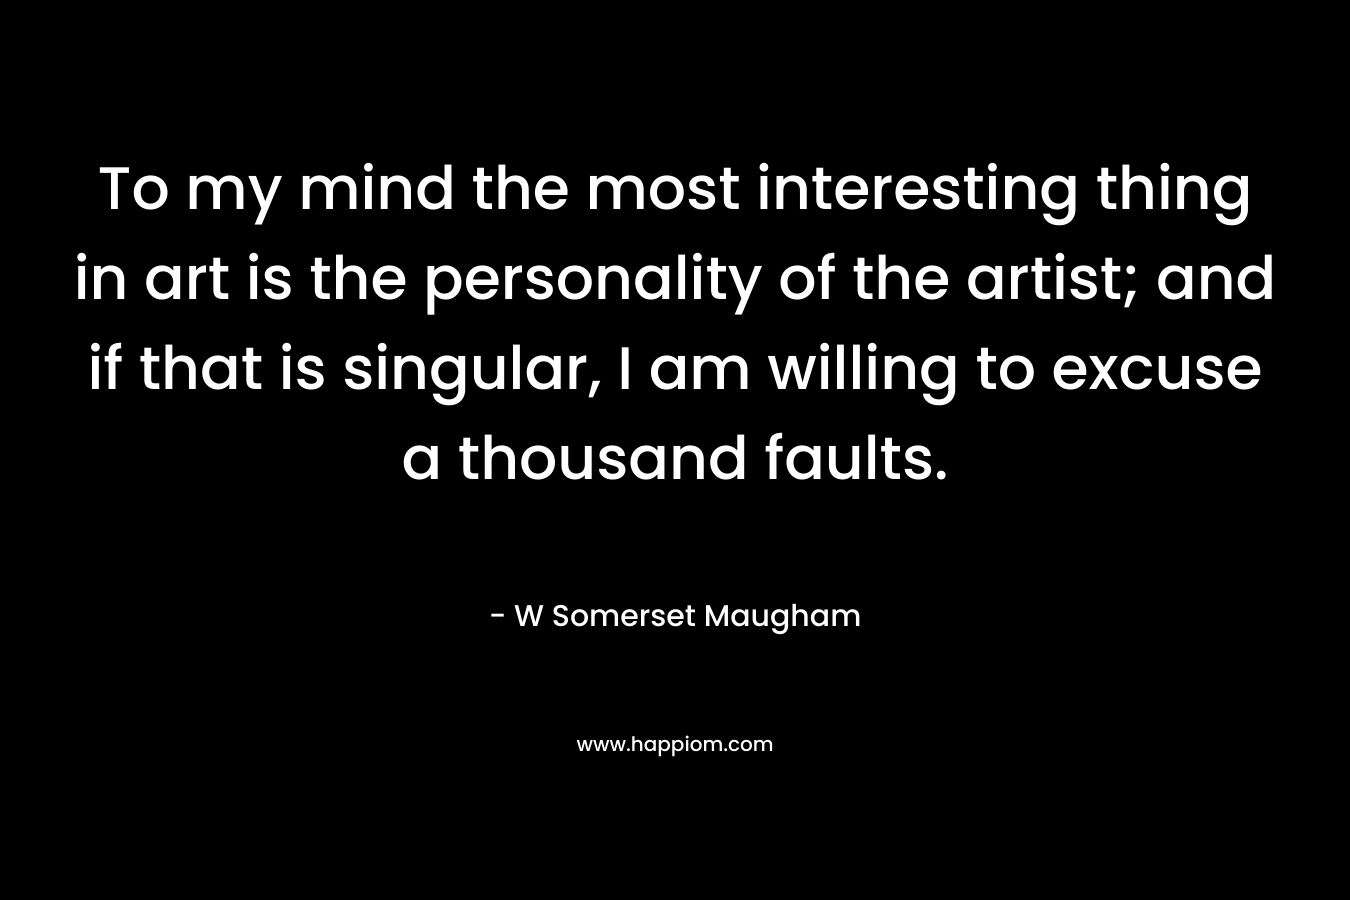 To my mind the most interesting thing in art is the personality of the artist; and if that is singular, I am willing to excuse a thousand faults.